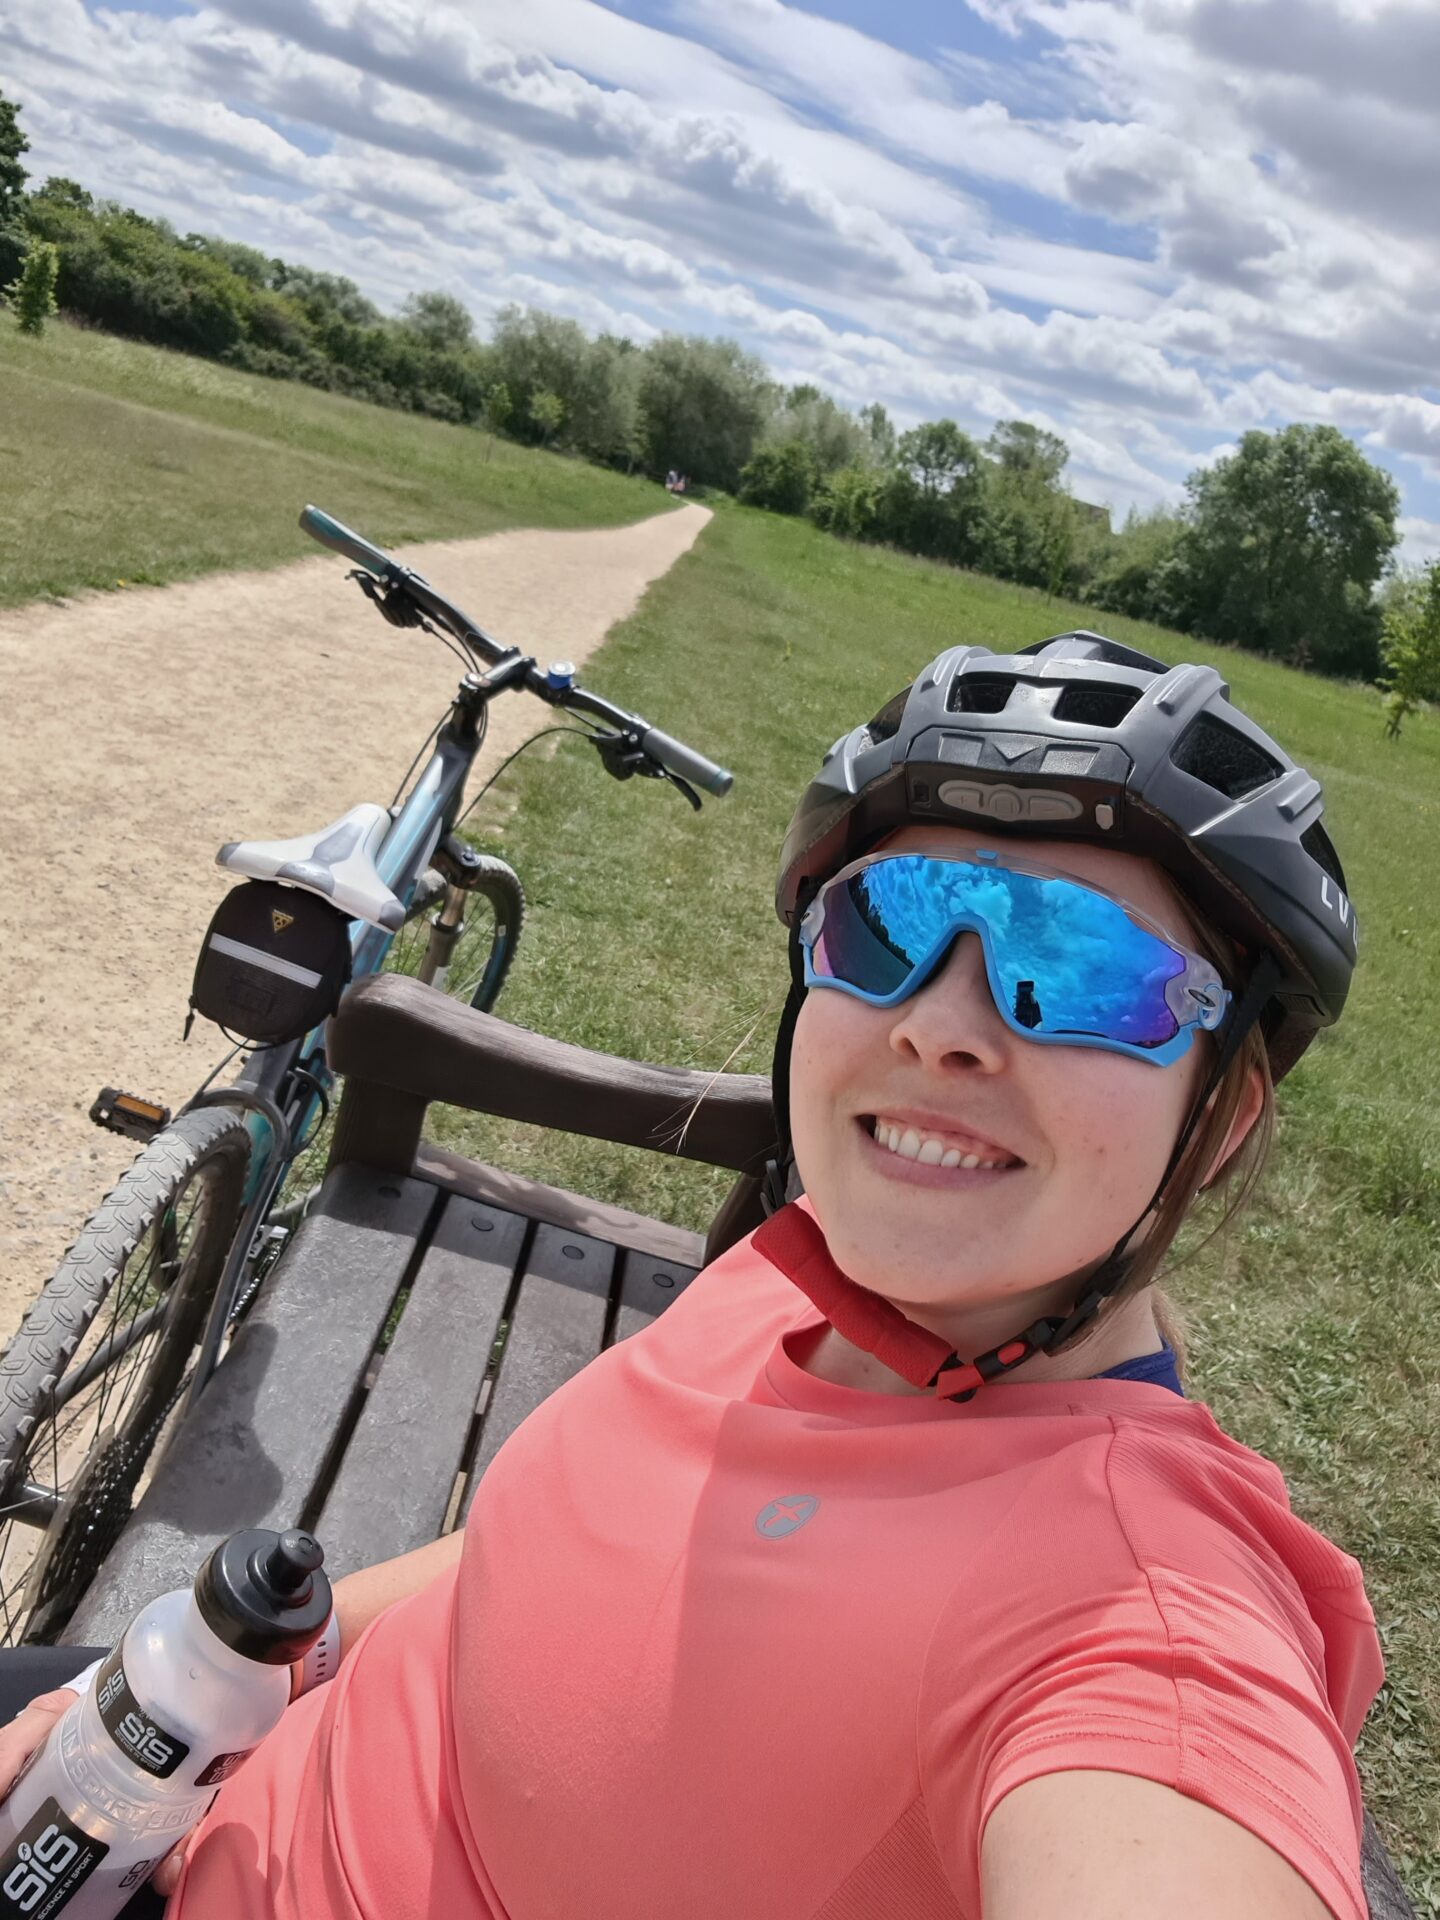 selfie of a smiling woman wearing a pink top, black cycle helmet and blue sunglasses. She is sitting on a bench with a bike next to her. 